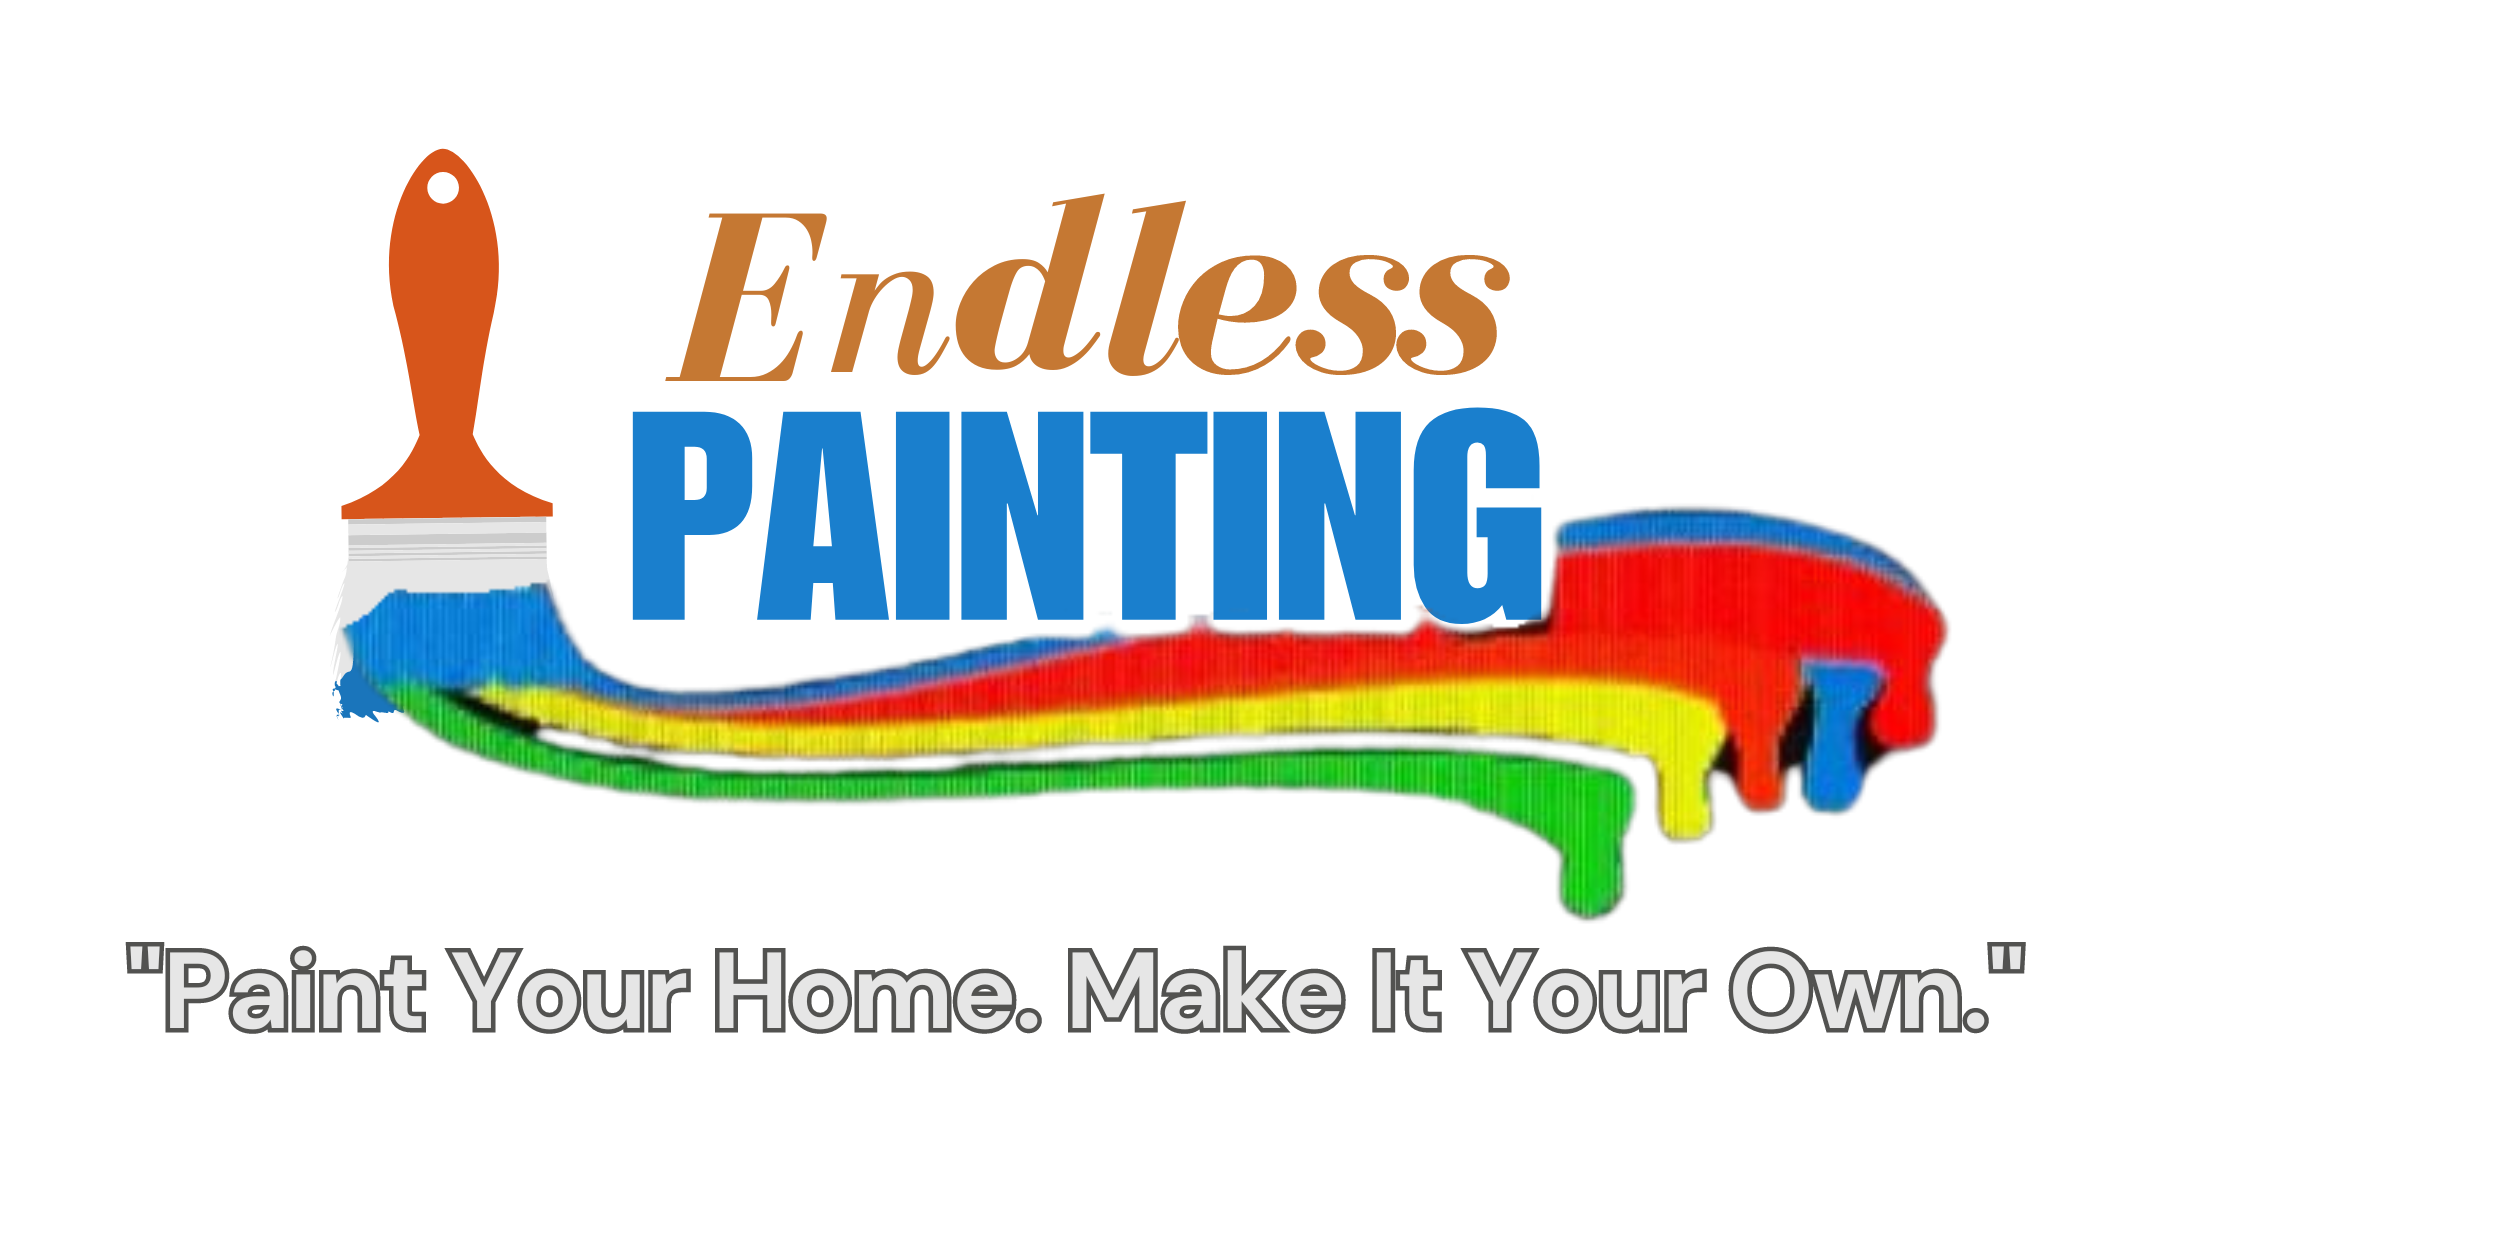 Endless Painting Services in California